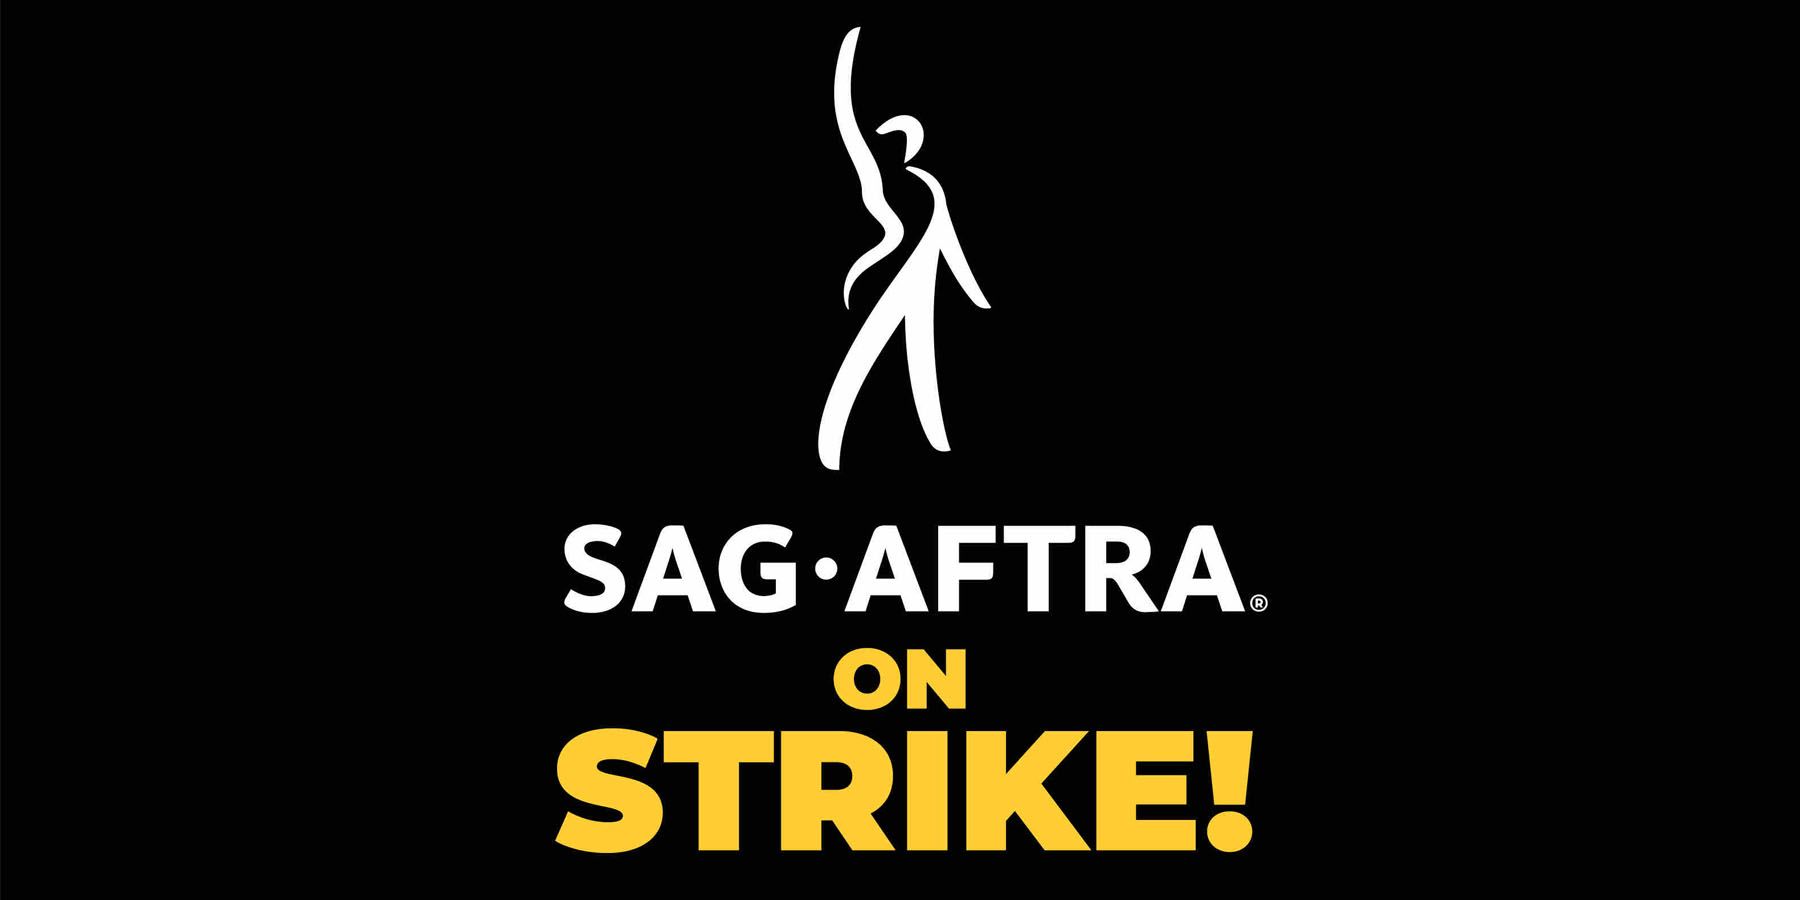 An image of the white and yellow SAG-AFTRA strike logo against a black background.